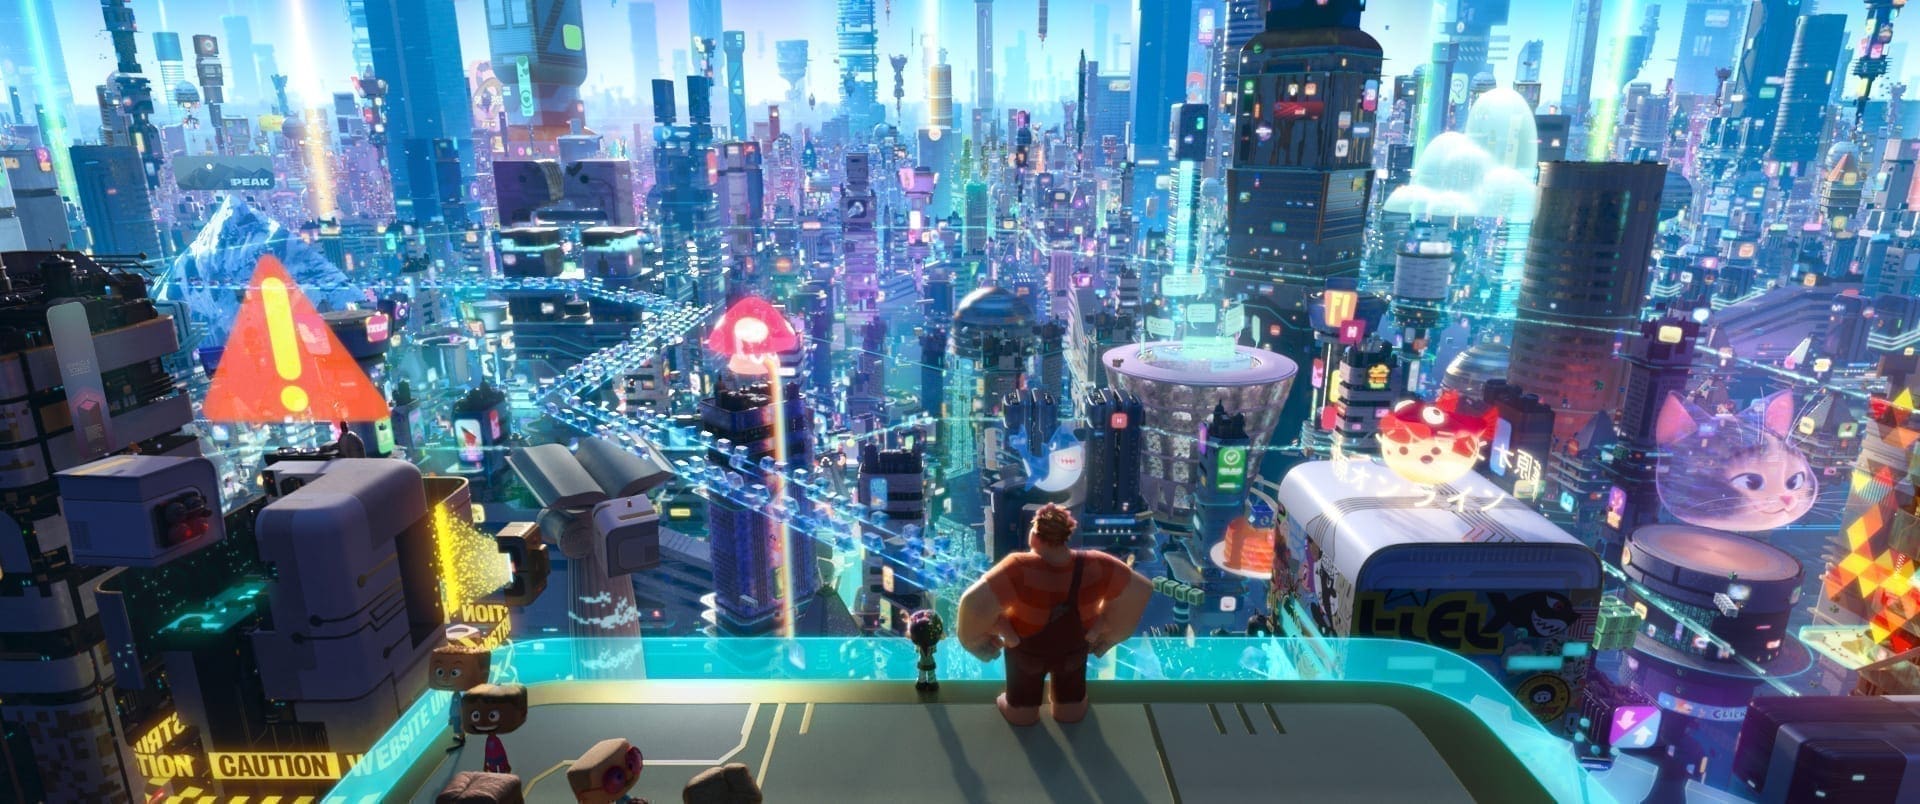 INTO THE INTERNET – In “Ralph Breaks the Internet: Wreck-It Ralph 2,” Vanellope von Schweetz and Wreck-It Ralph leave the arcade world behind to explore the uncharted and thrilling world of the internet. In this image, Vanellope and Ralph have a breathtaking view of the world wide web, a seemingly never-ending metropolis filled with websites, apps and social media networks. On a quest to save Vanellope’s game, how will these two misfits ever succeed in this vast new world? Featuring the voices of Sarah Silverman as Vanellope and John C. Reilly as Ralph, Walt Disney Animation Studios’ “Ralph Breaks the Internet: Wreck-It Ralph 2” opens in U.S. theaters on Nov. 21, 2018. ©2018 Disney. All Rights Reserved.